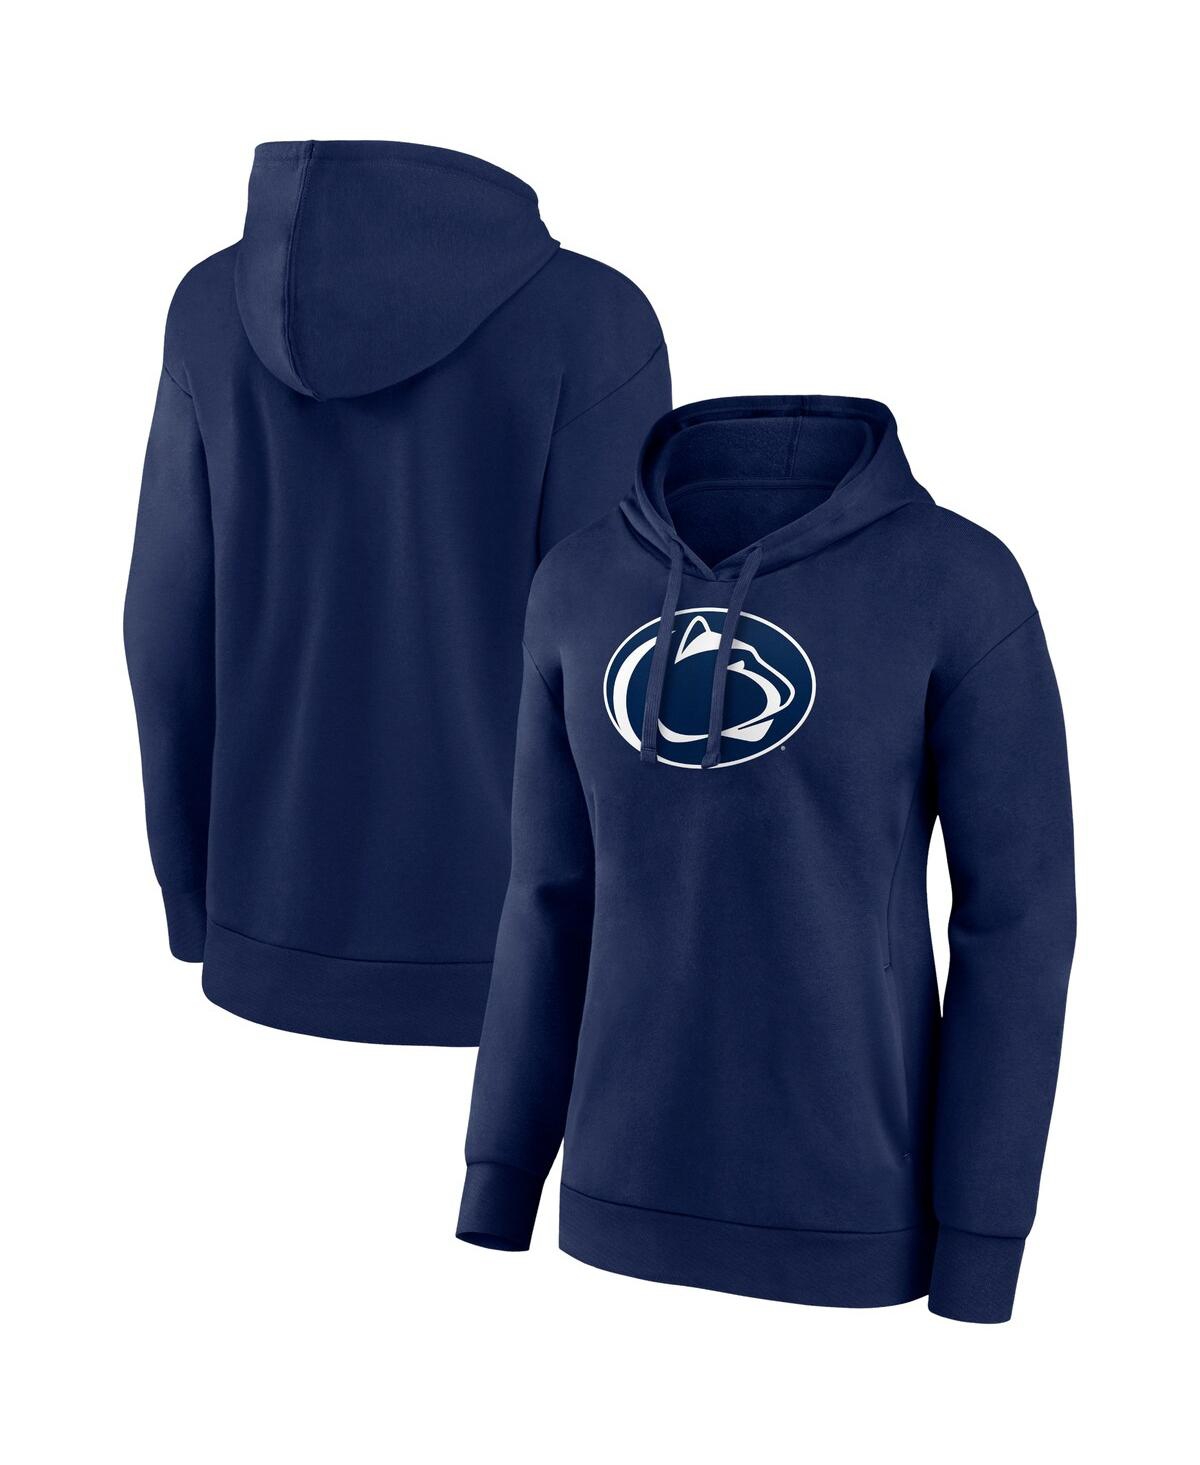 Fanatics Women's  Navy Penn State Nittany Lions Evergreen Pullover Hoodie